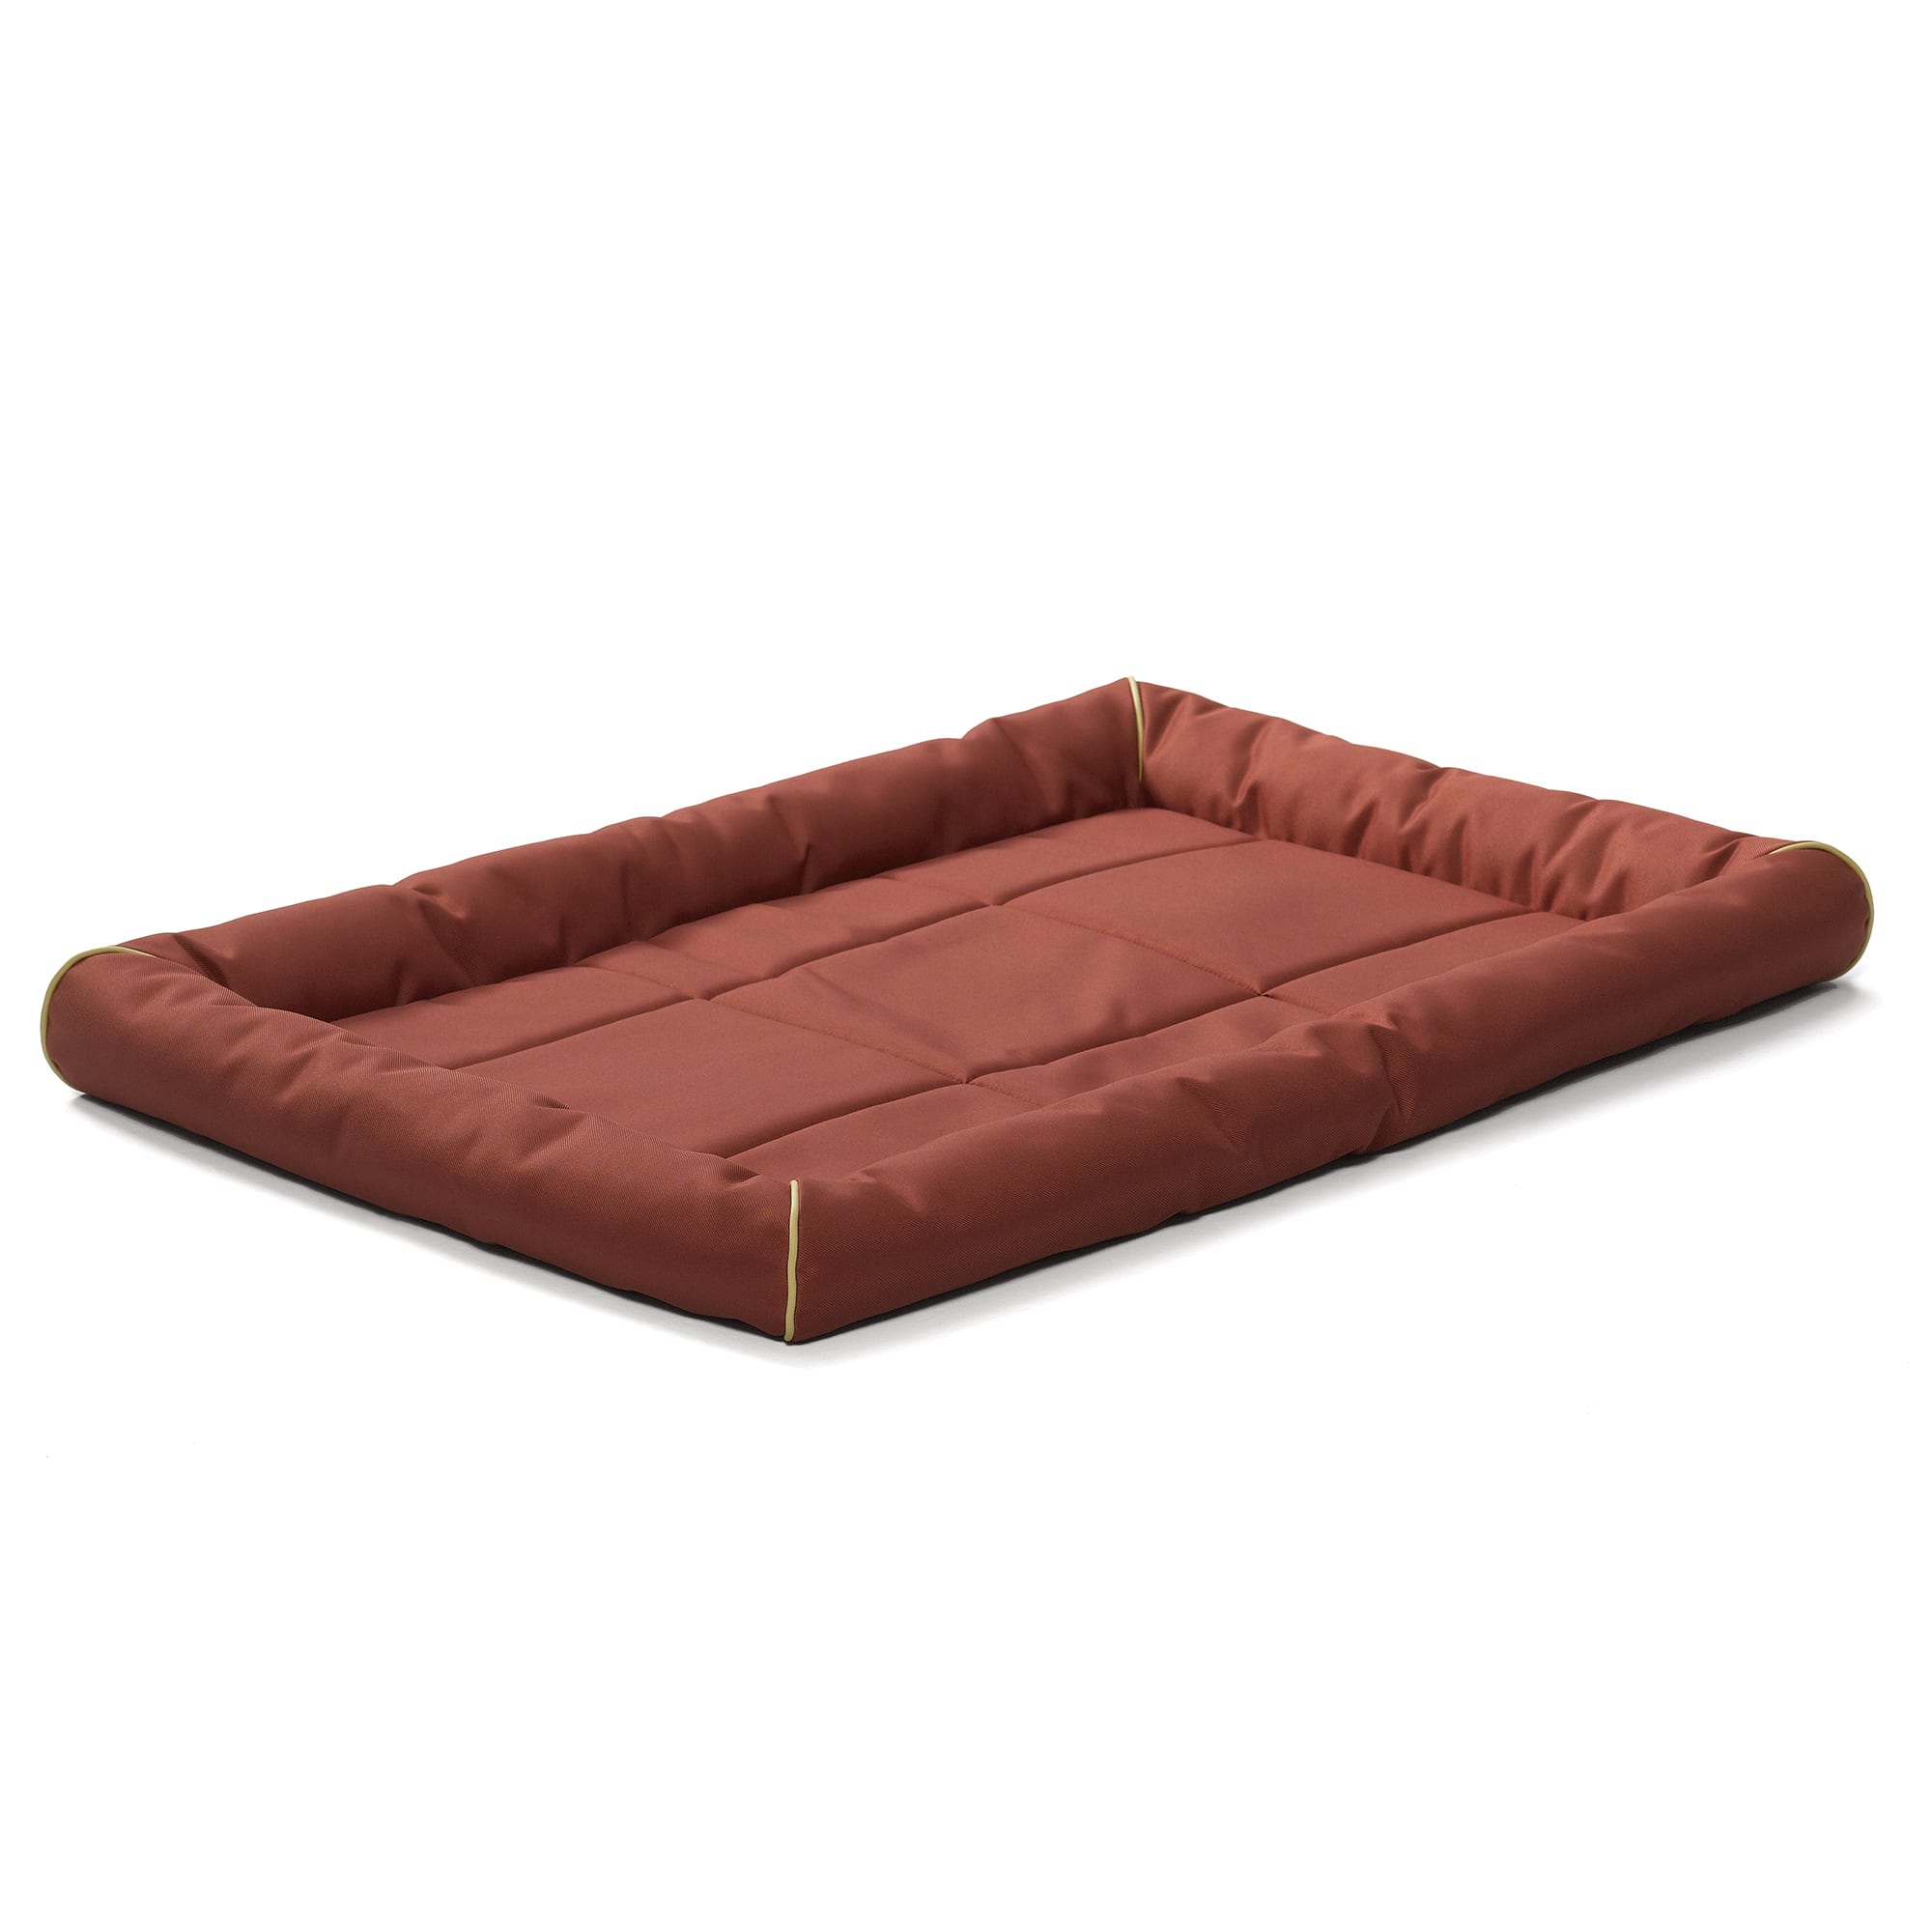 Photos - Bed & Furniture Midwest Quiet Time Maxx Red Dog Bed, 42.5" L X 29" W, X-Large, Red 